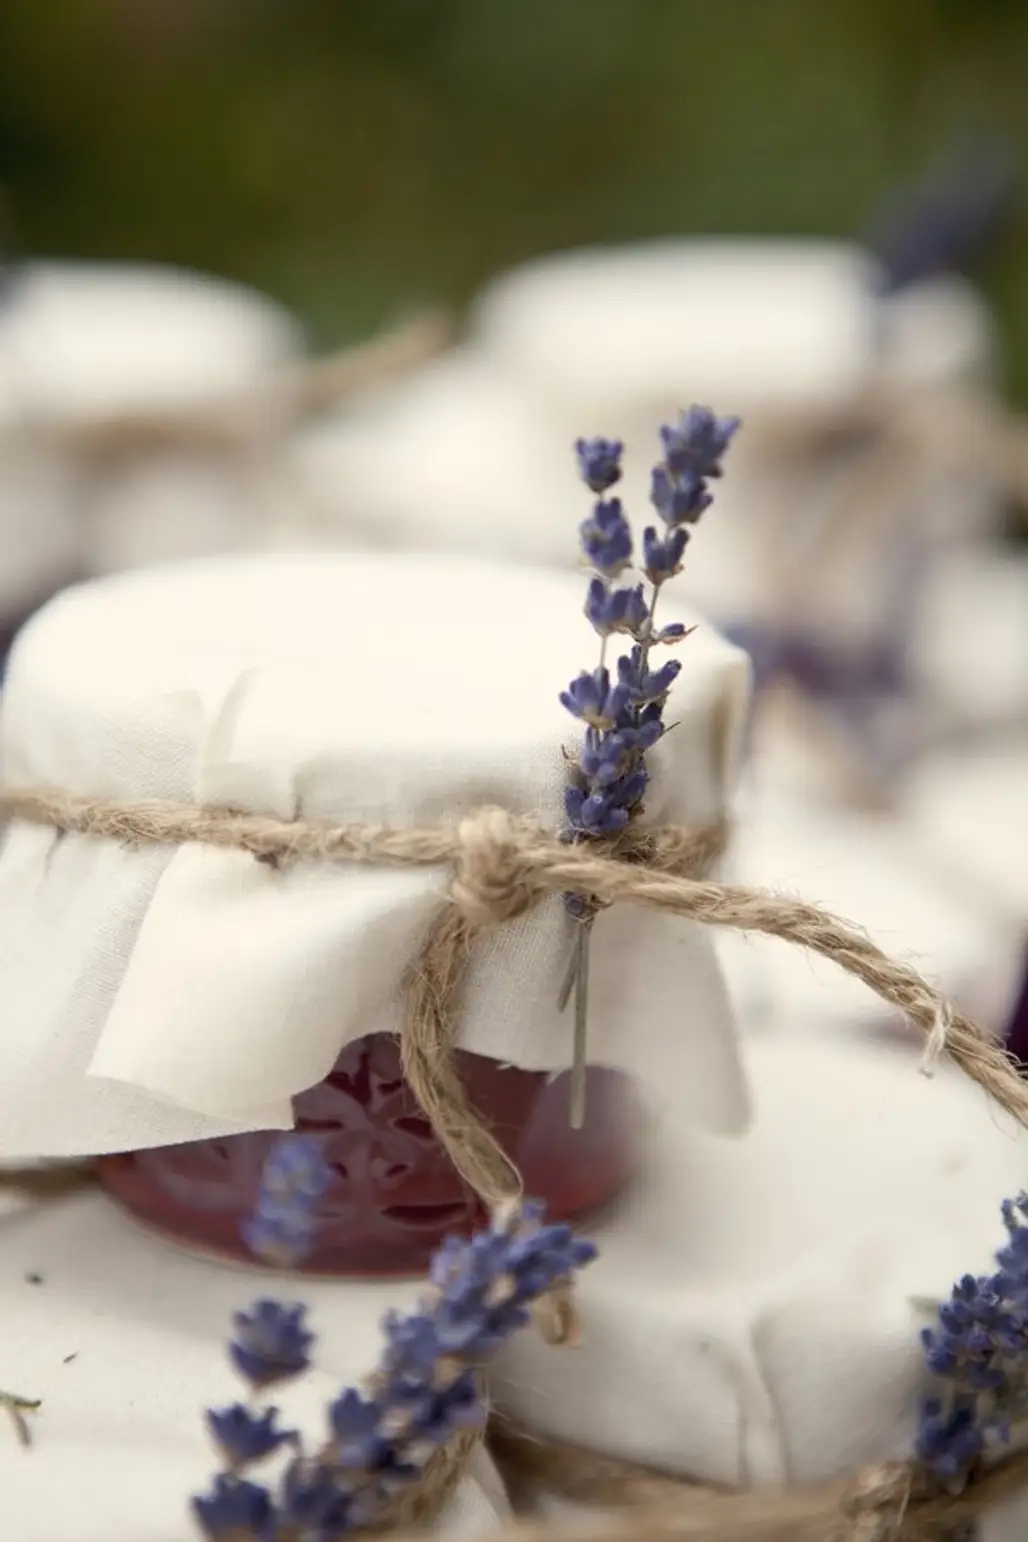 Have Guests Throw Lavender Instead of Birdseed